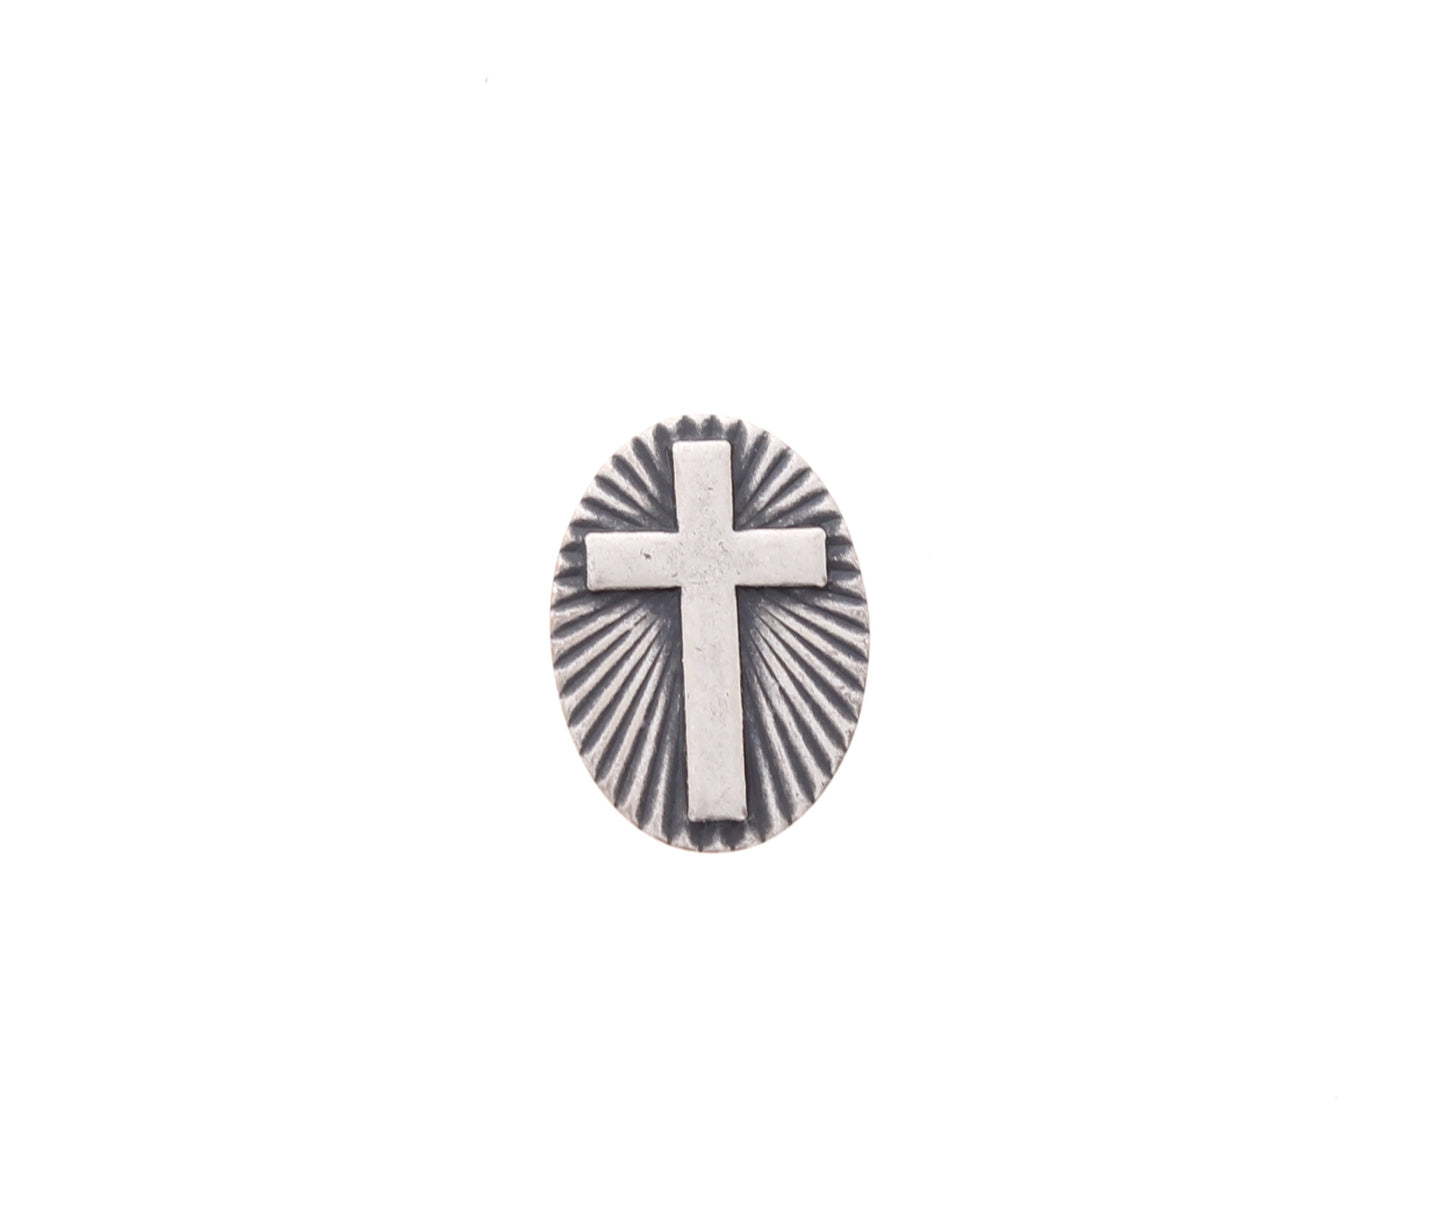 14x10mm Classic Silver Cross Charms, pack of 6